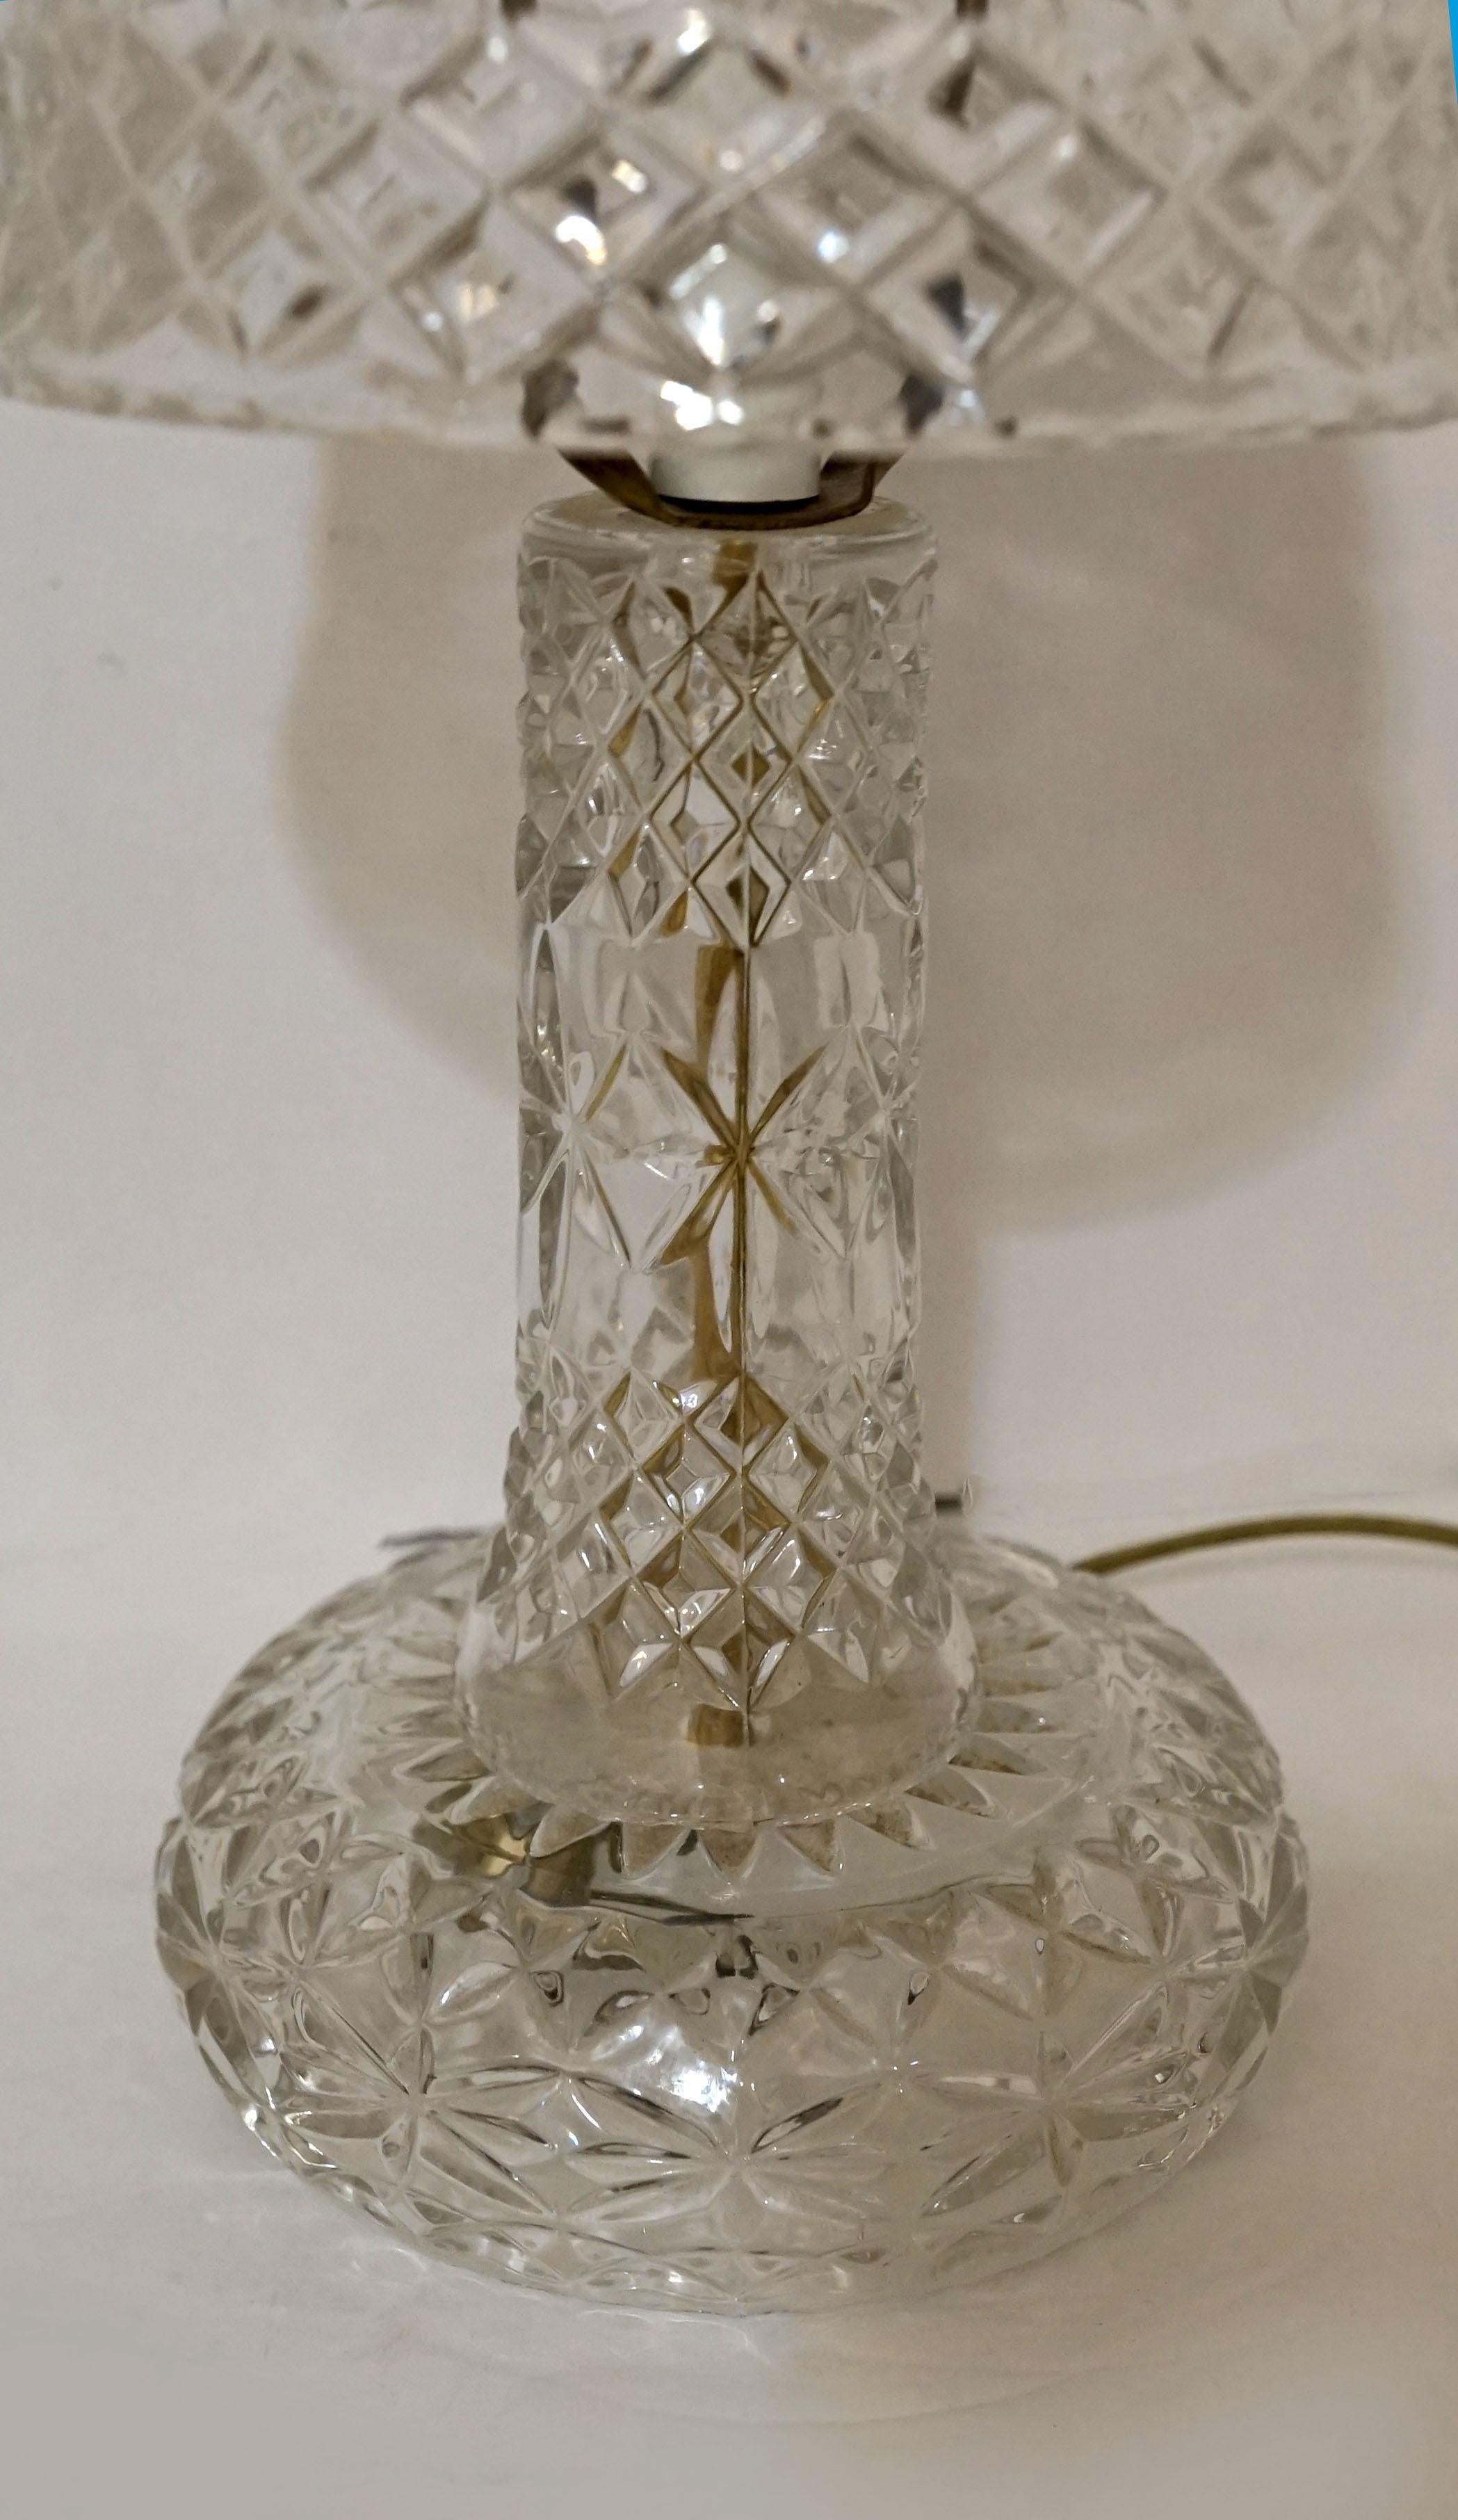 This is a rare crystal lamp that is topped with a shade that is formed like a mushroom cap. The lamp is pressed leaded crystal and is either American or English from the mid 20th century. 
There is a diamond and star pattern throughout, and the